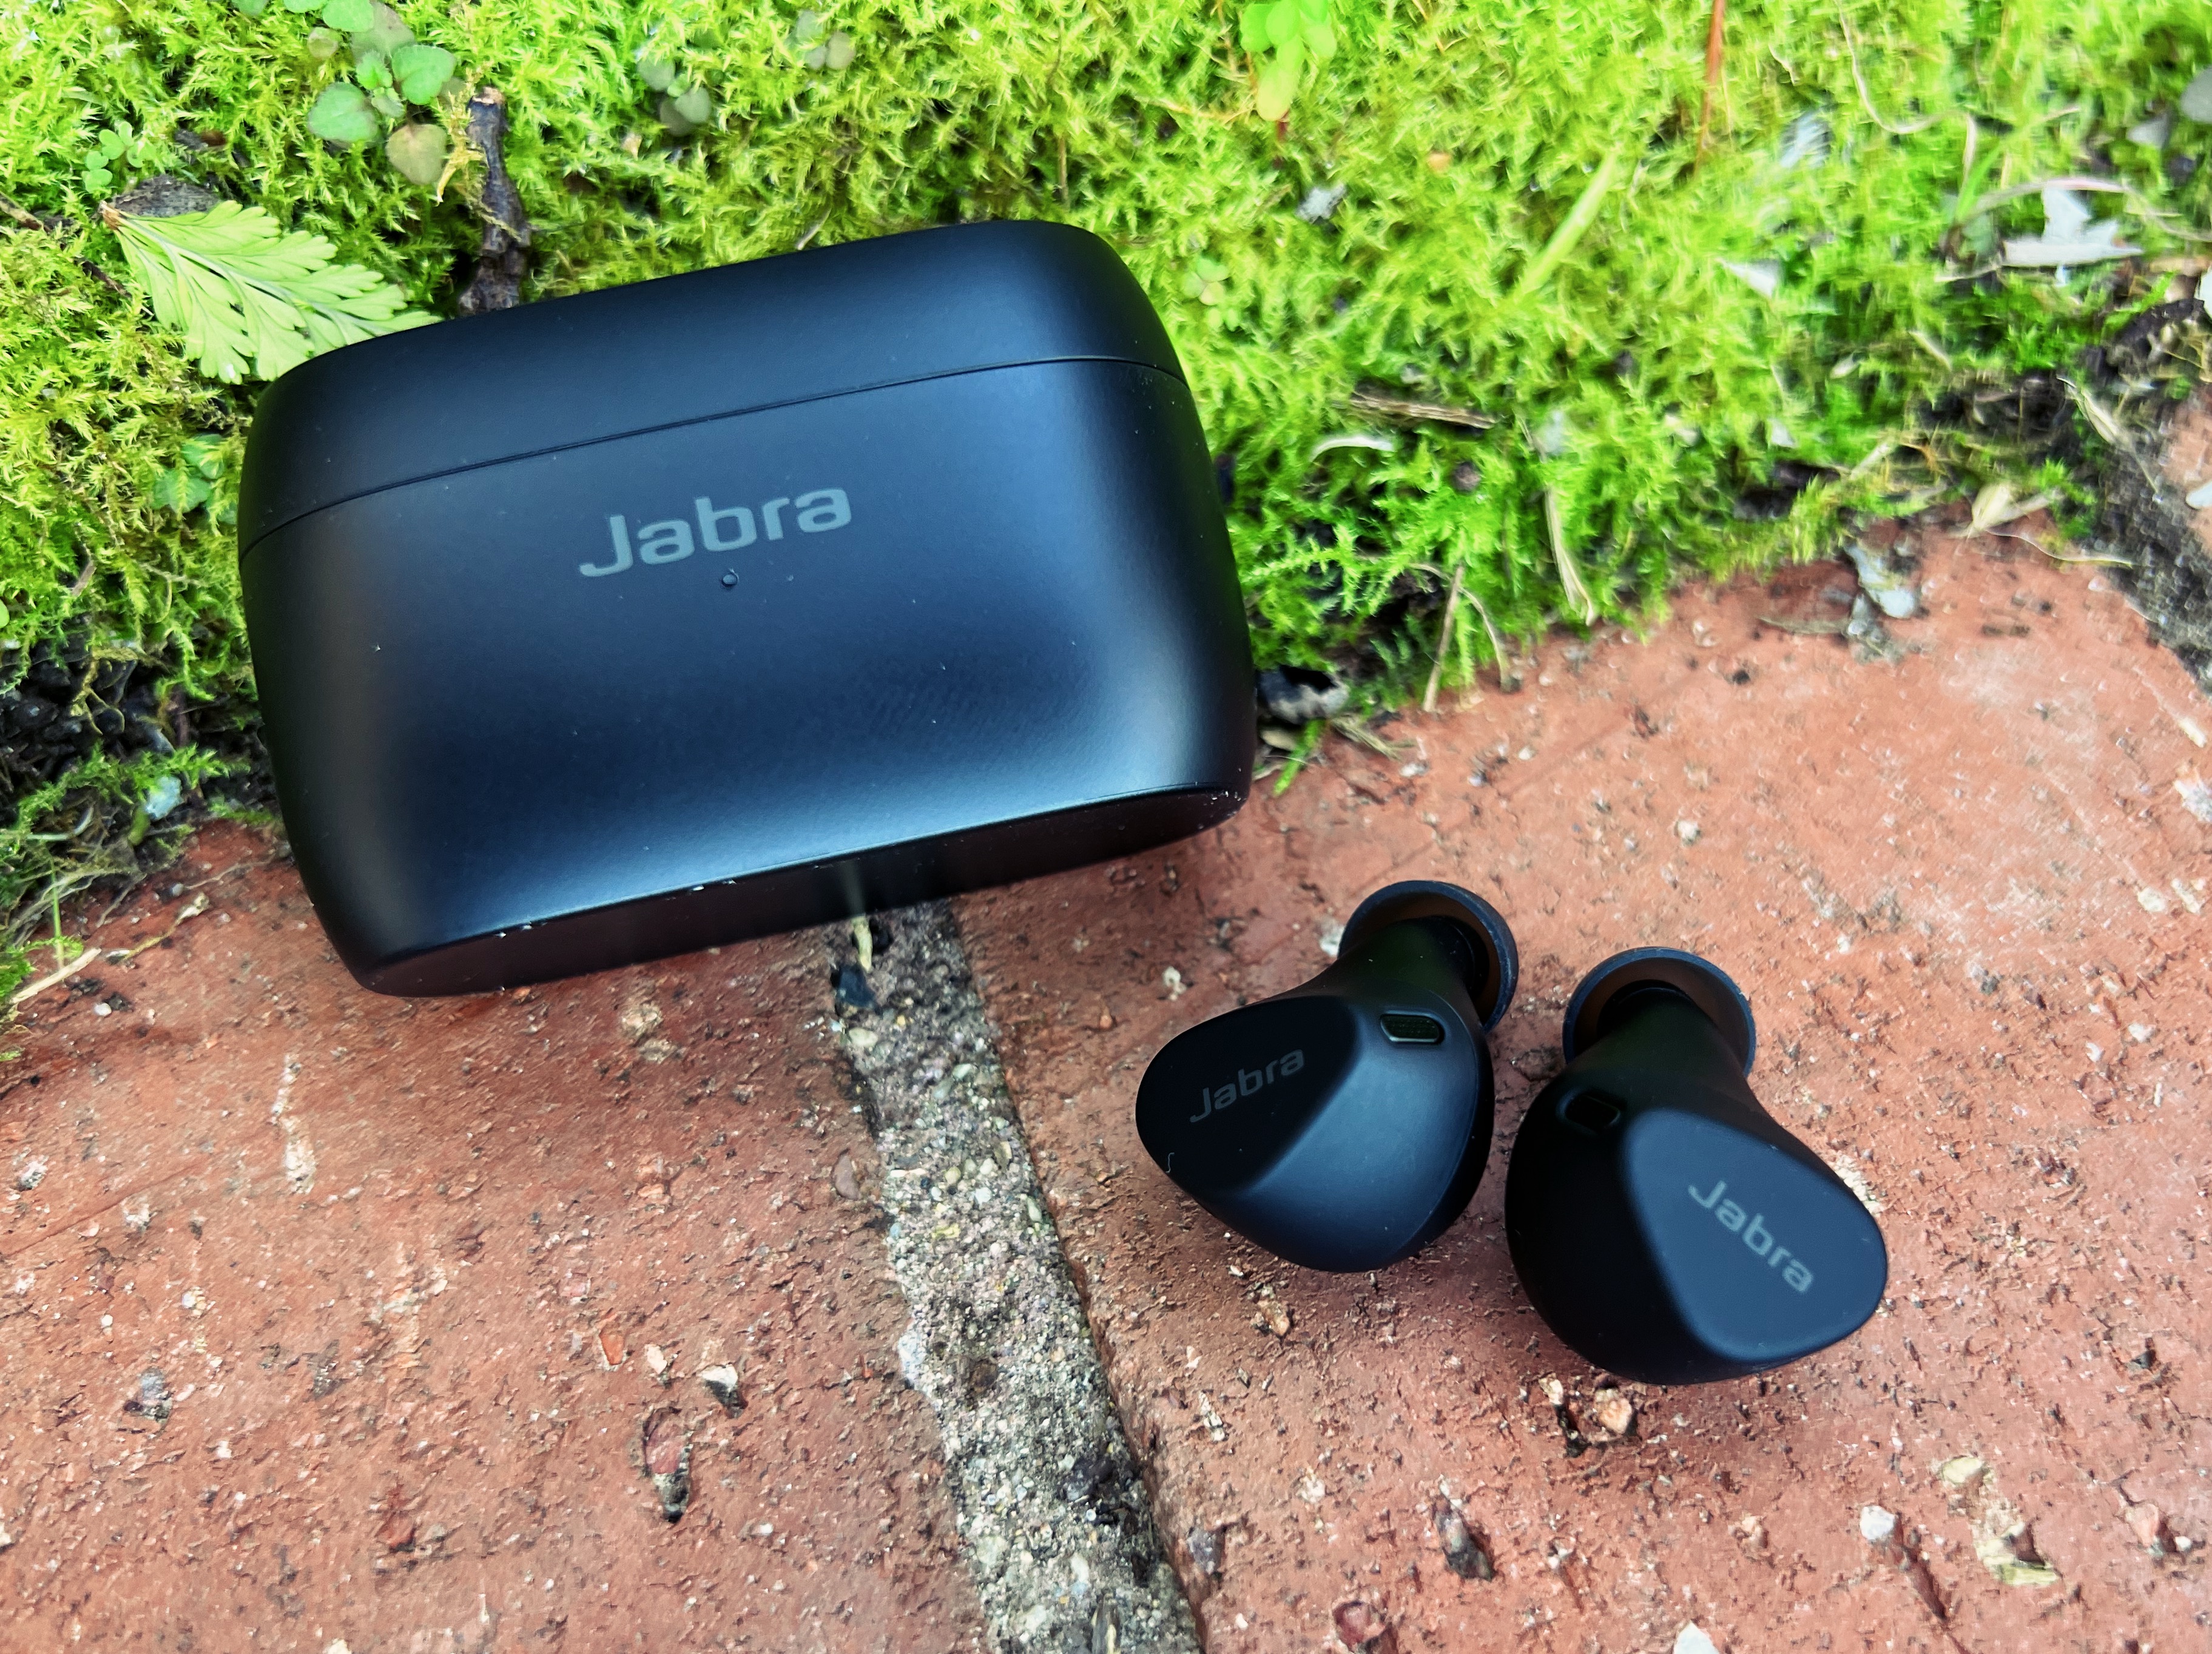 Get moving with clarity - Jabra Elite 4 Active Earbuds - Digital Reviews  Network